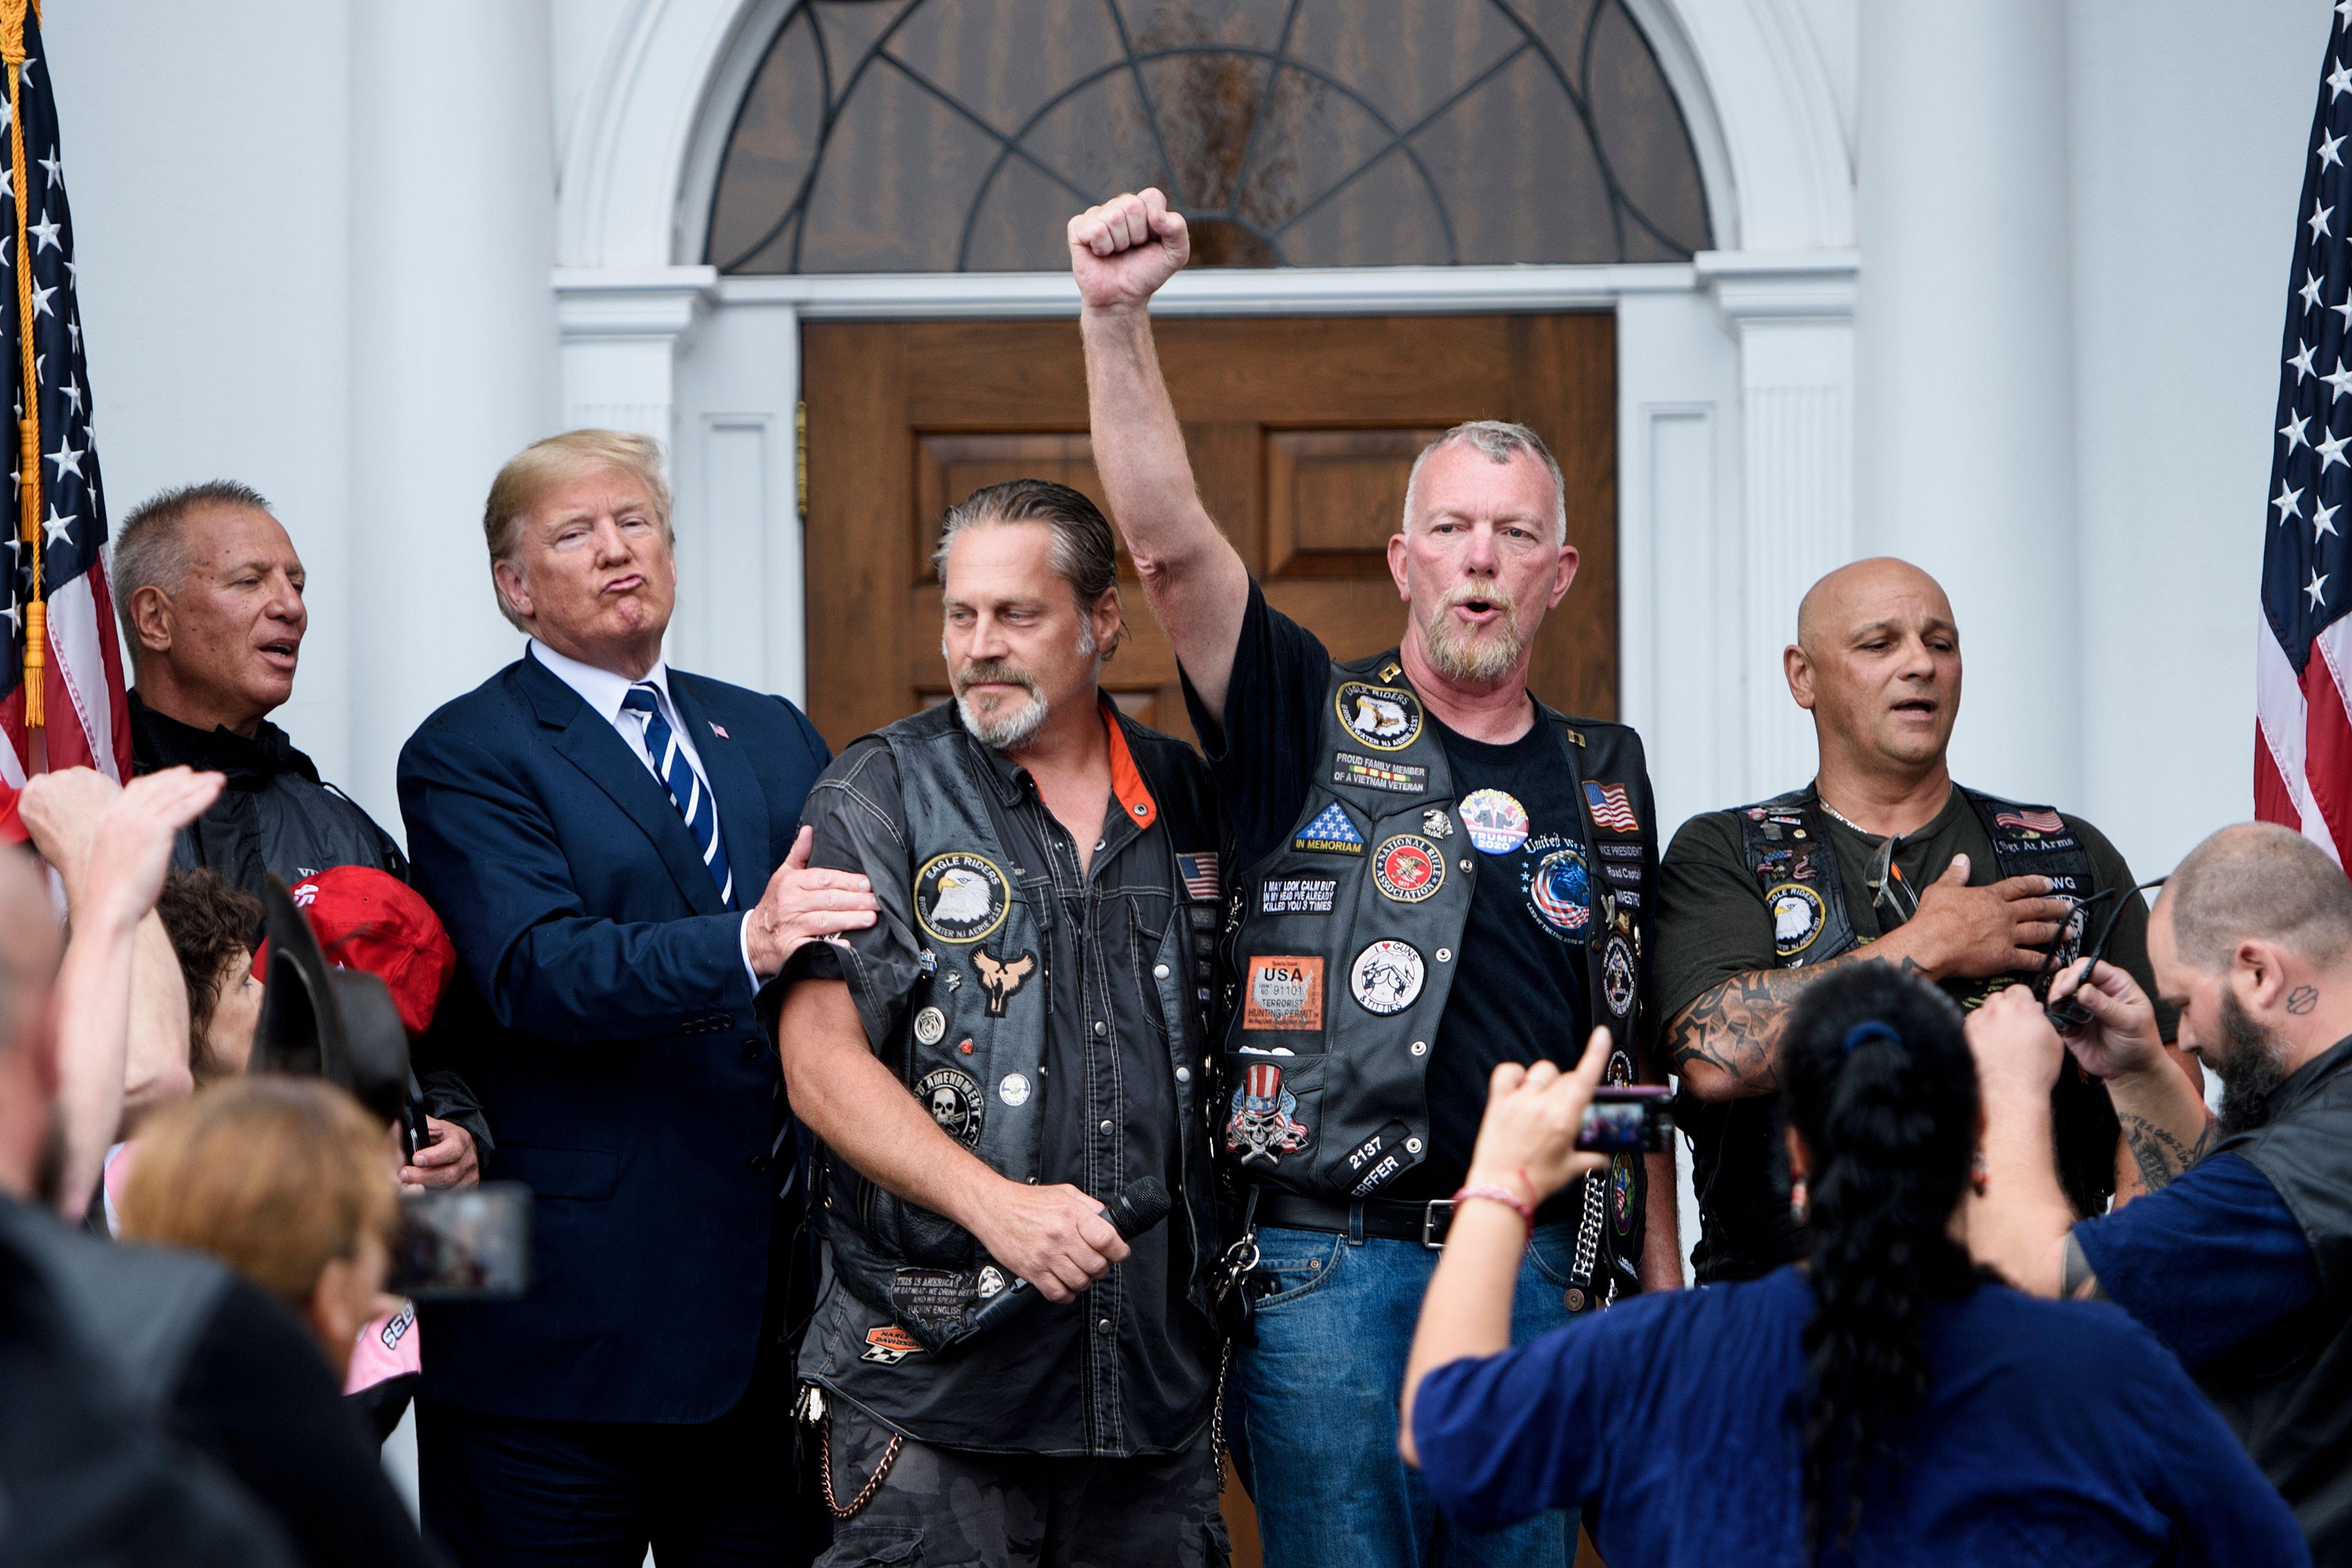 Trump posing for photos with a group of bikers